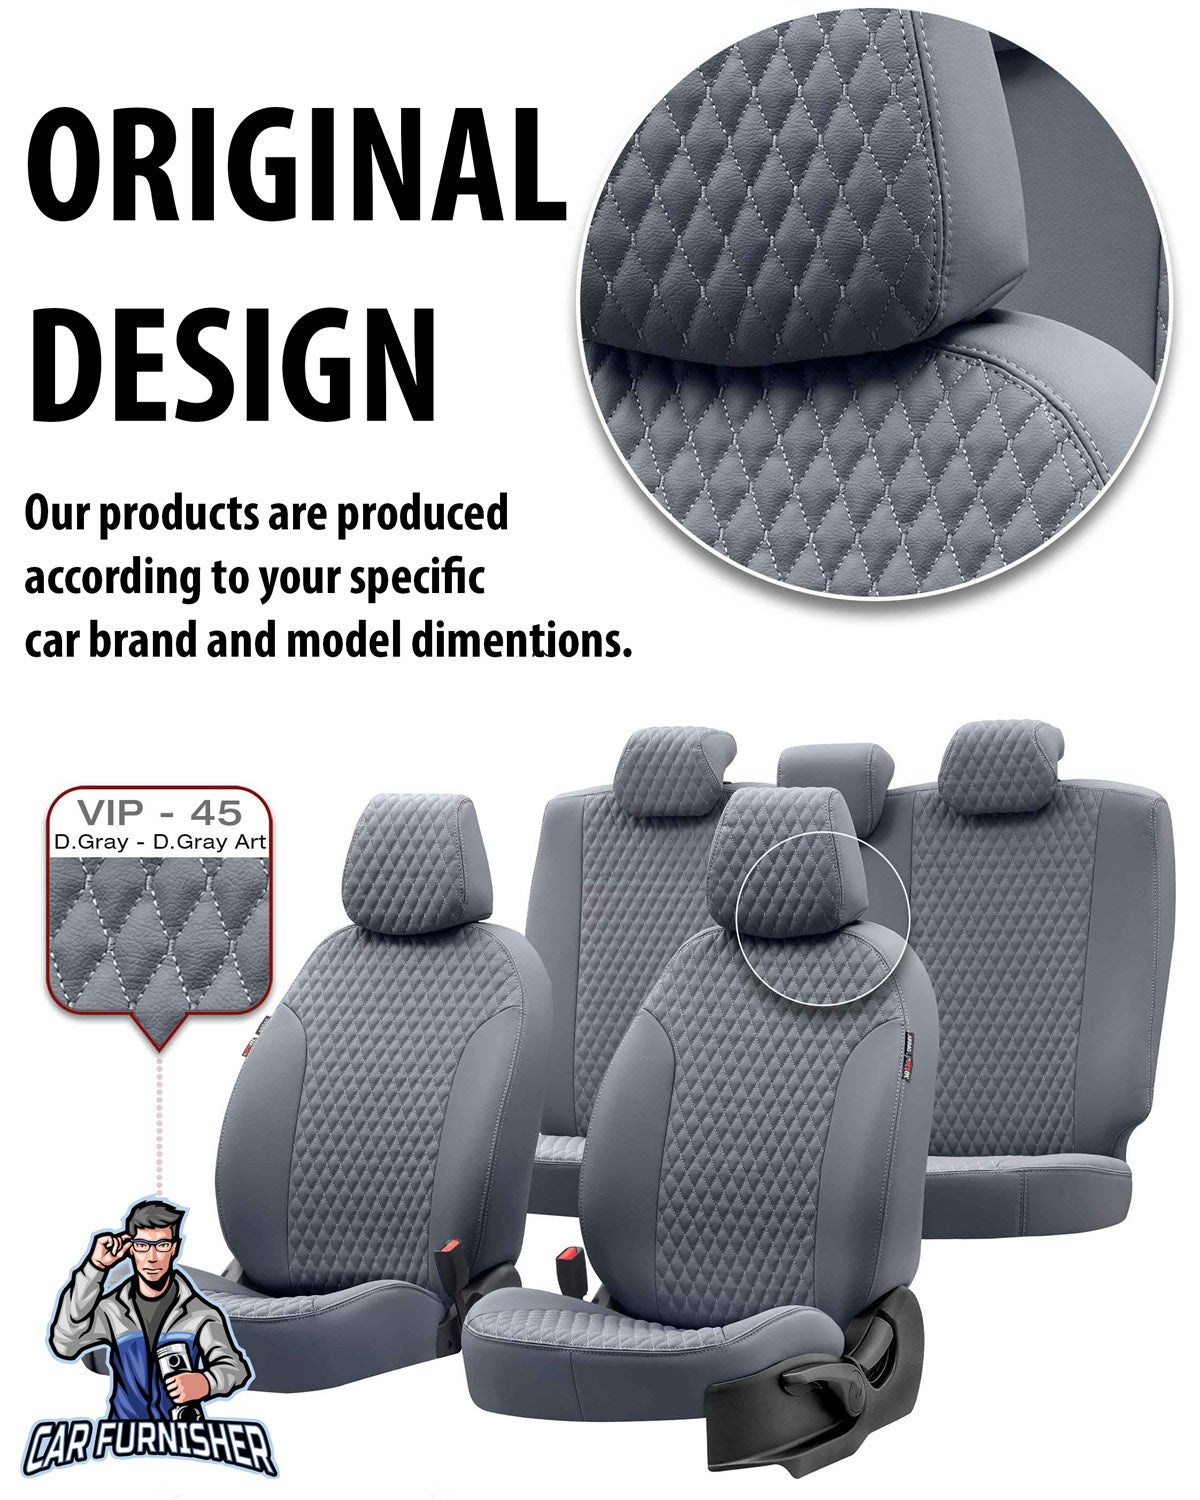 Ssangyong Korando Seat Covers Amsterdam Leather Design Black Leather